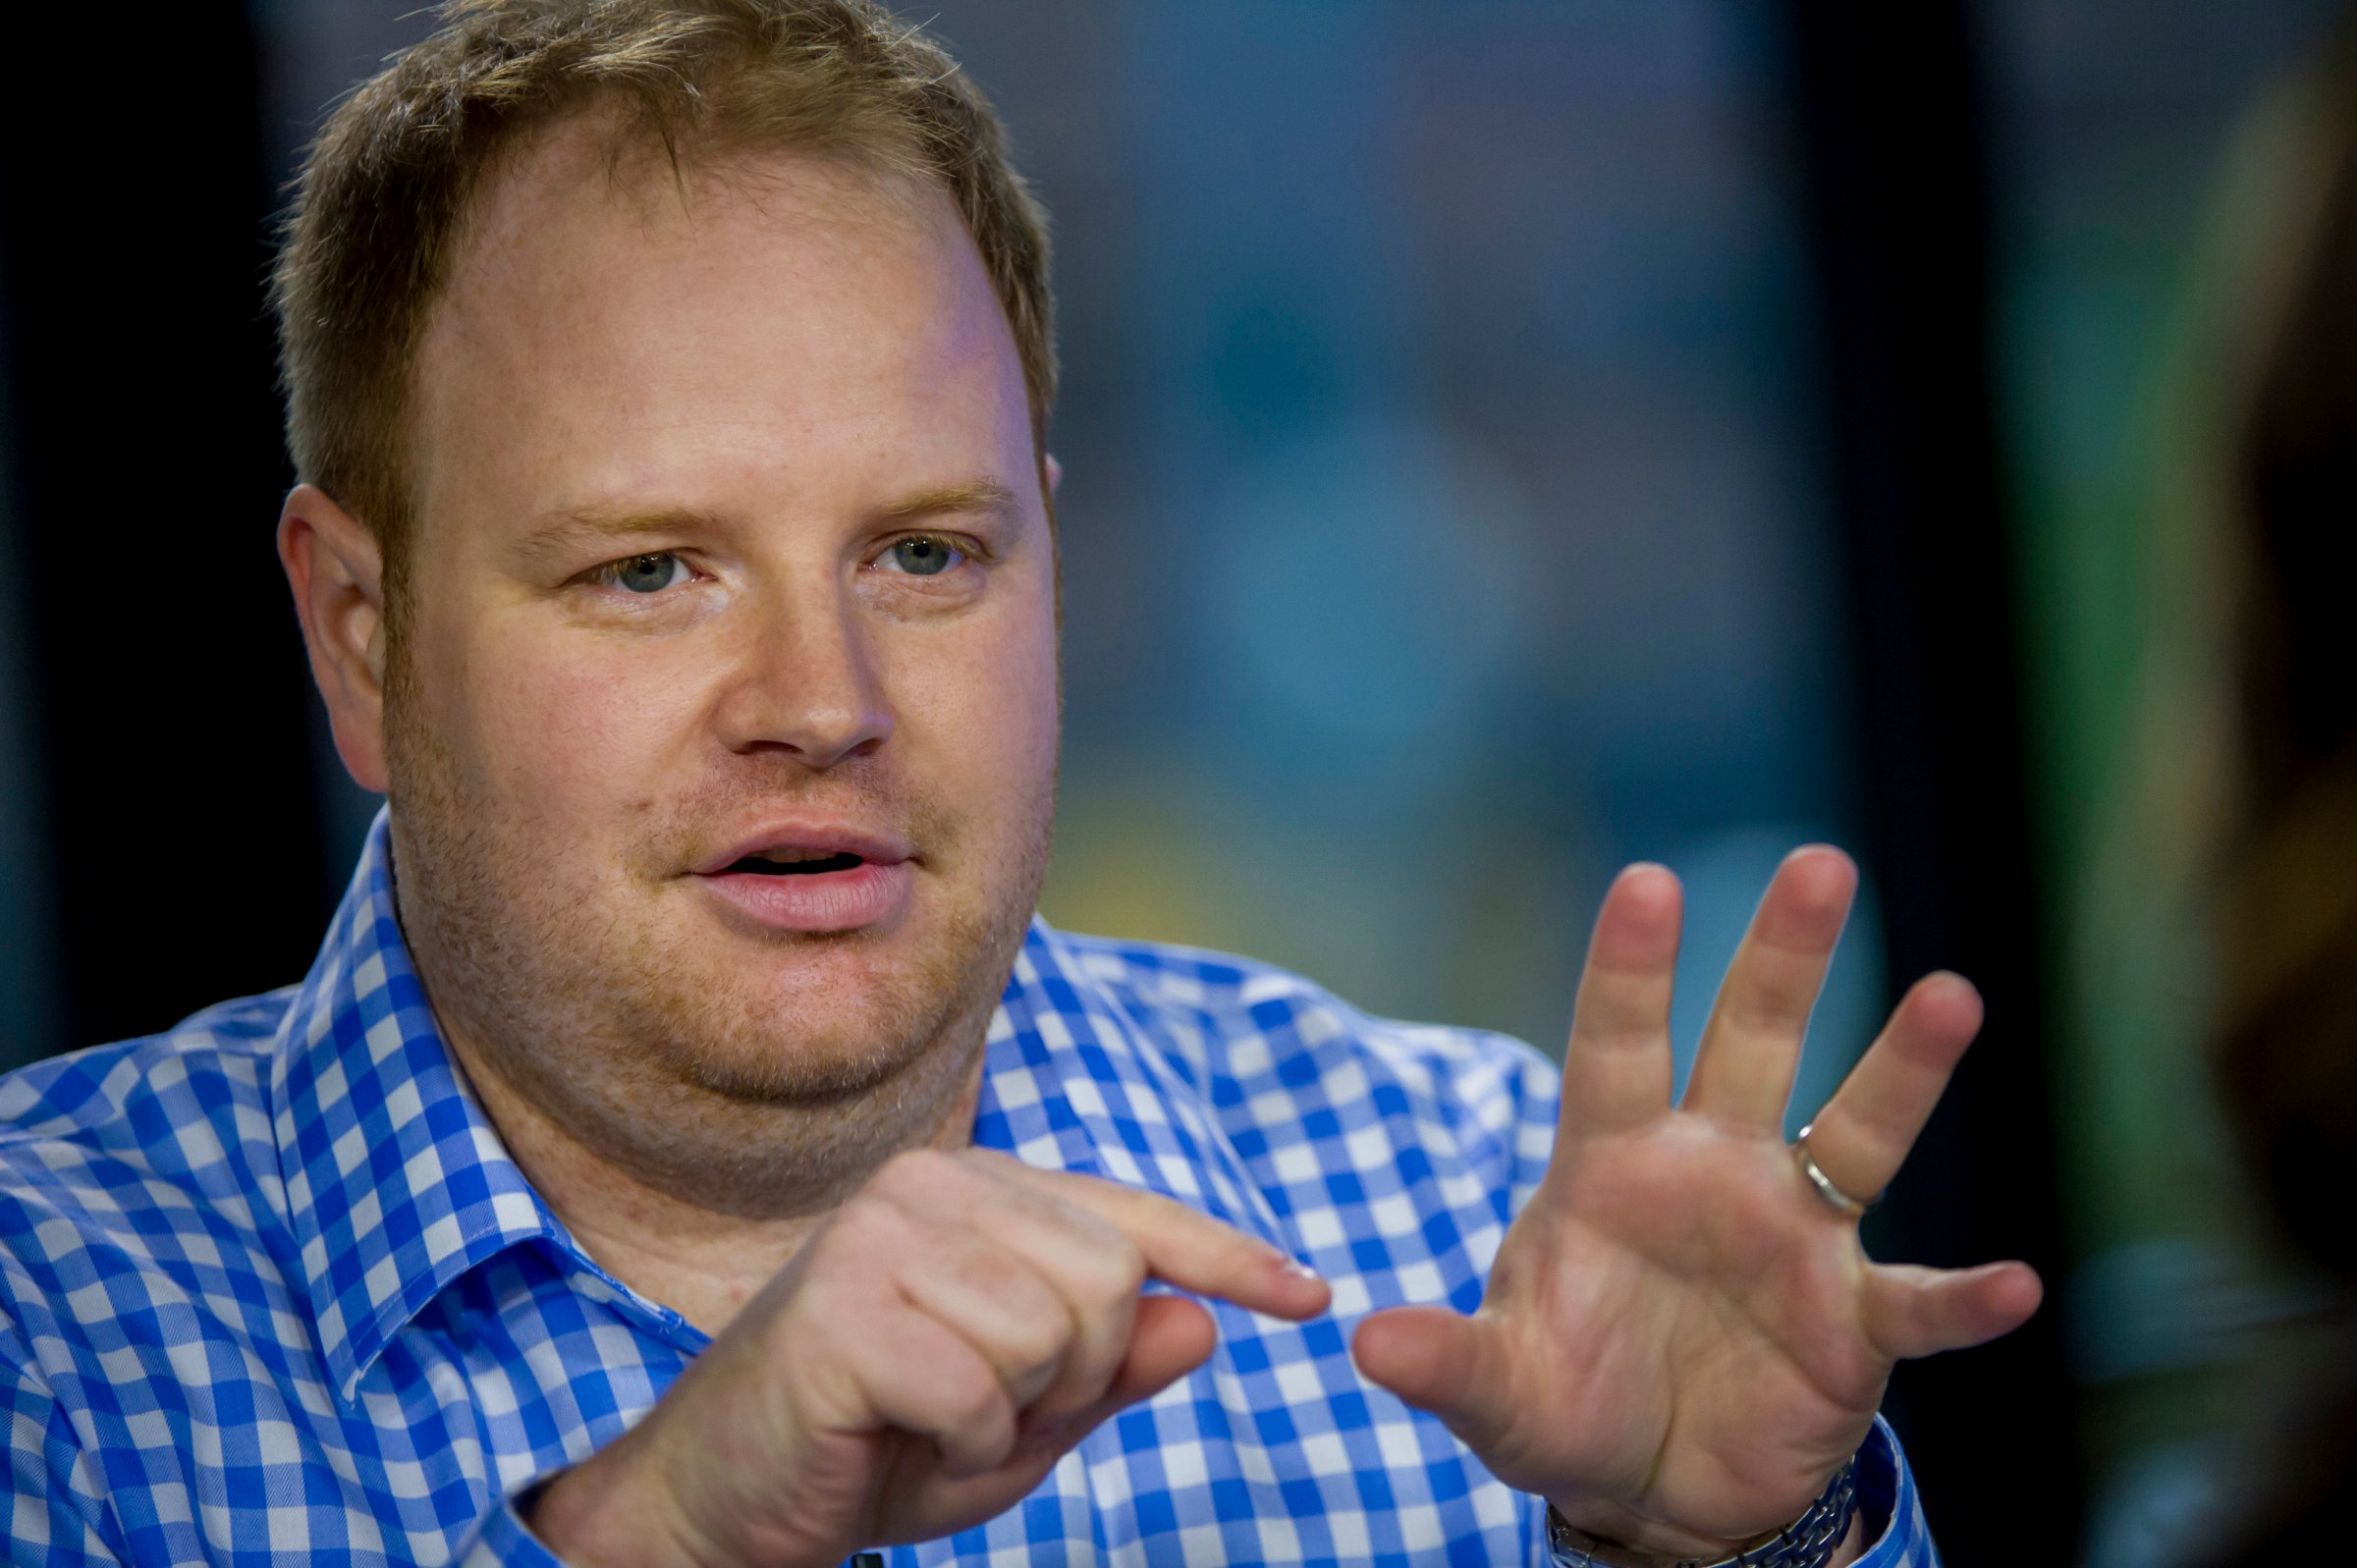 Parker Conrad, co-founder and chief executive officer of Zenefits, speaks during a Bloomberg West television interview in San Francisco, California, U.S., on Wednesday, Dec. 10, 2014.